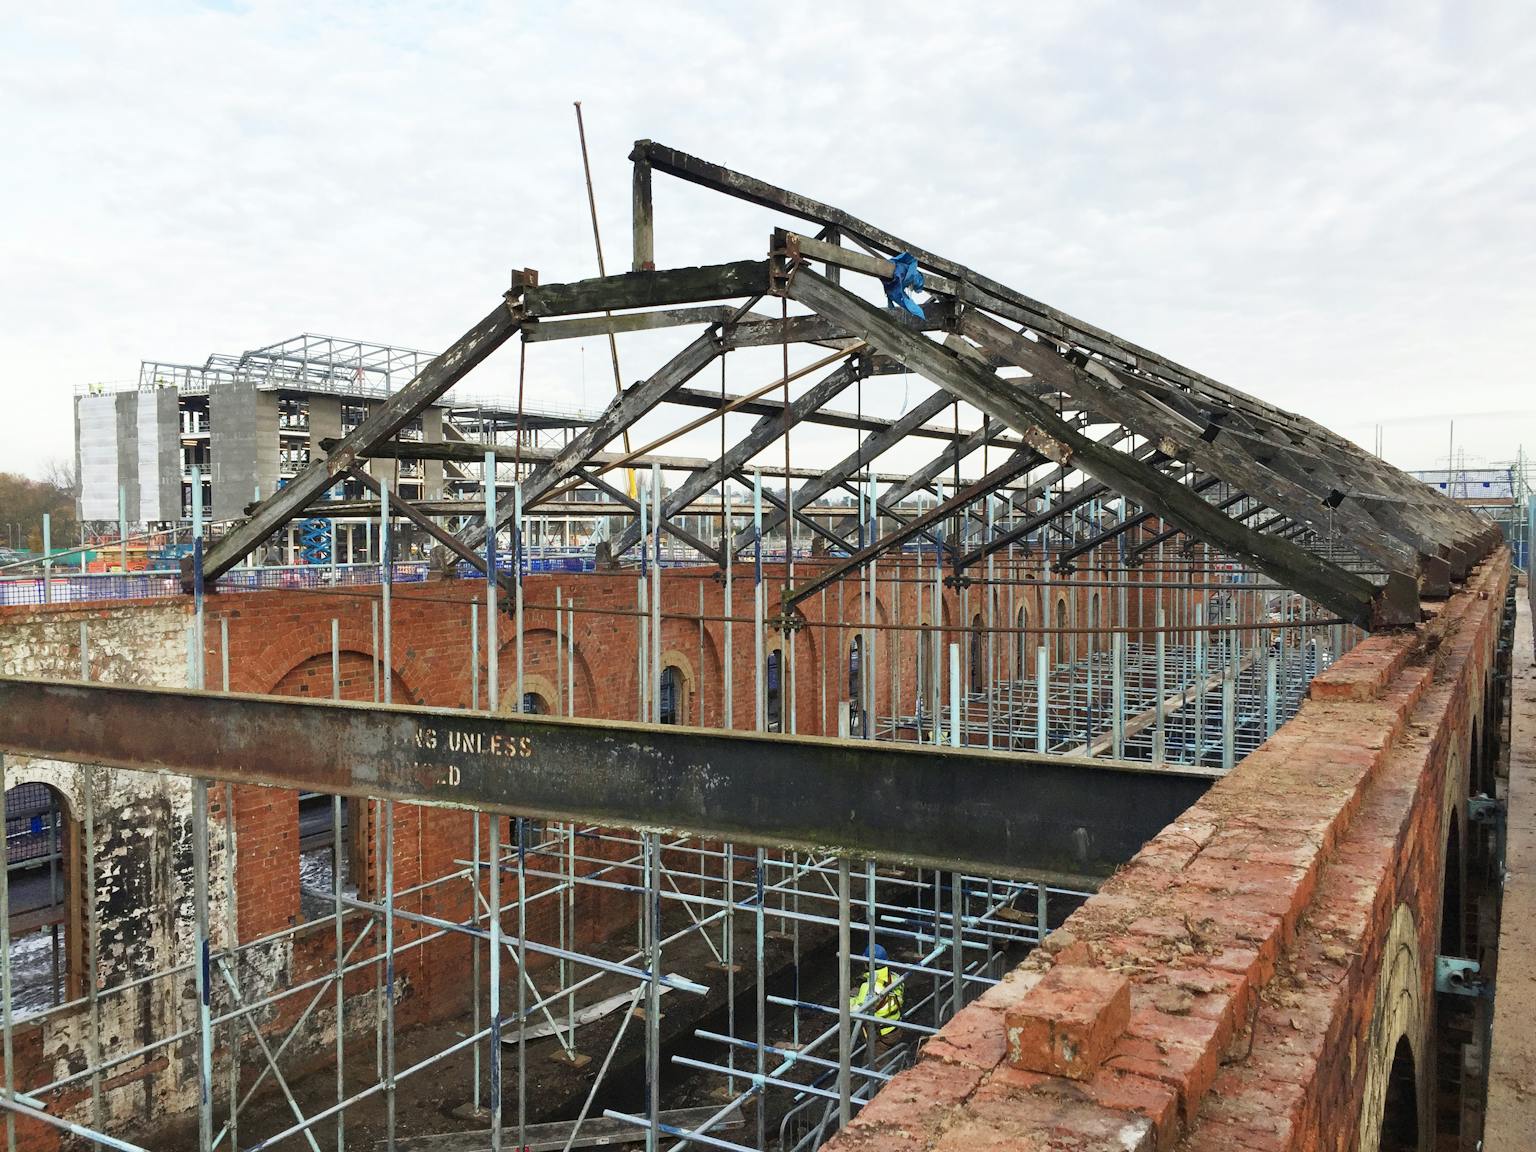 Reinstating the original roof trusses in the University of Northampton Engine Shed